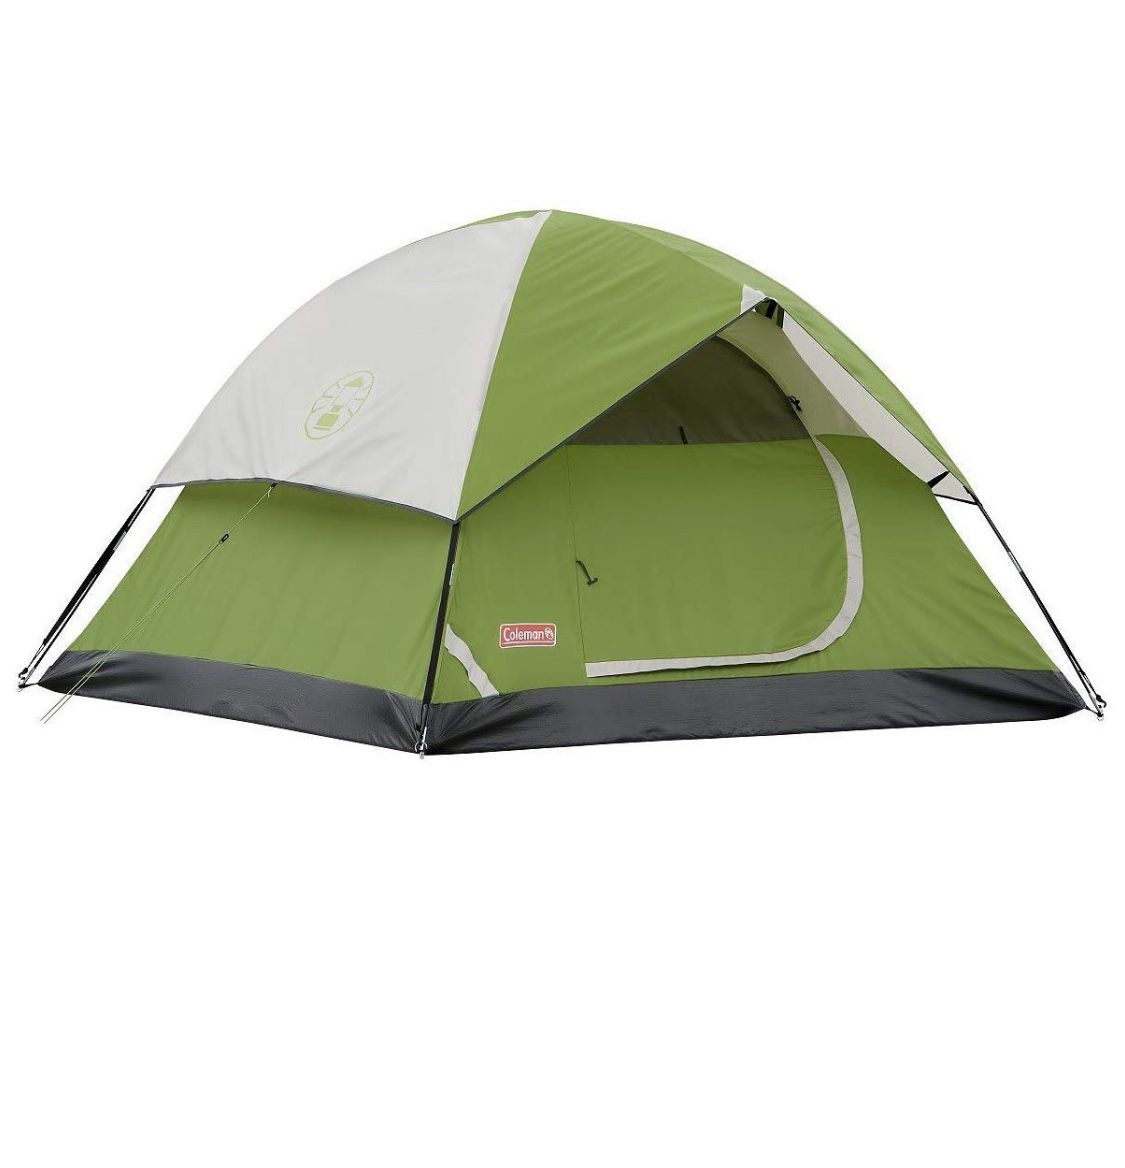 Green 6 person Coleman Dome Tent for Camping